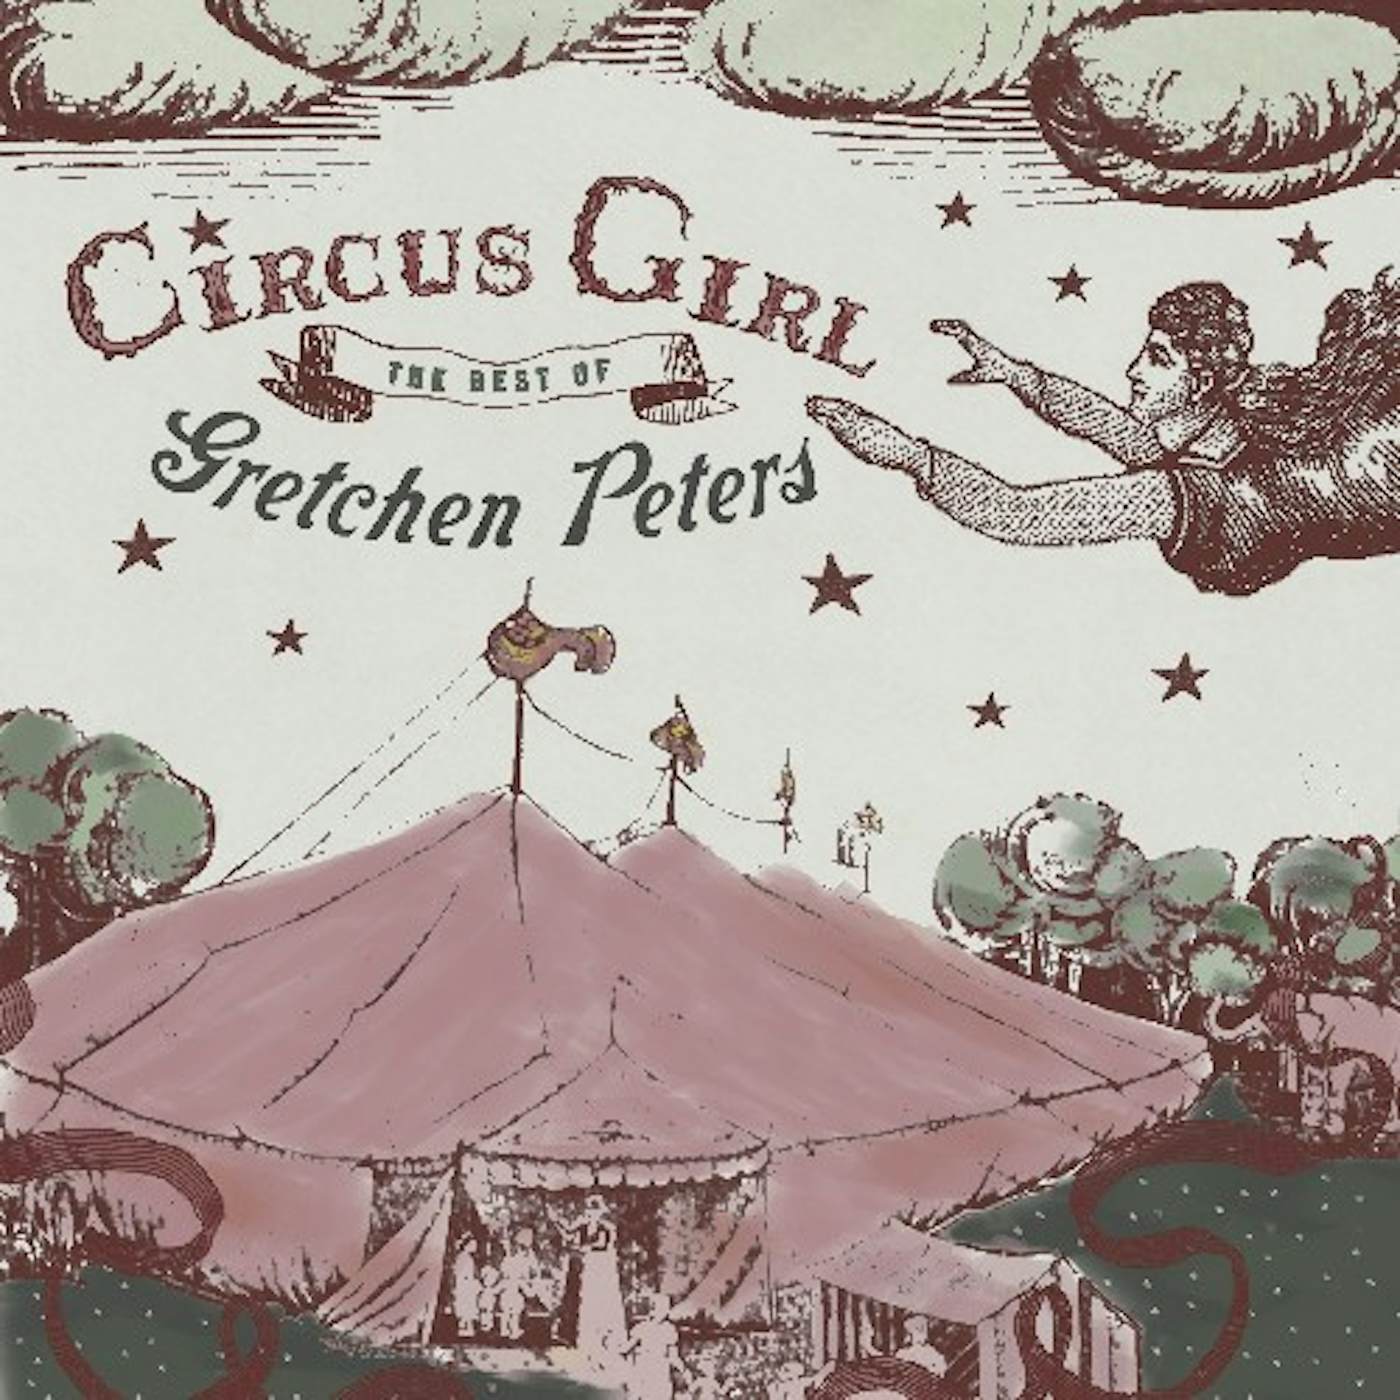 CIRCUS GIRL: THE BEST OF GRETCHEN PETERS CD